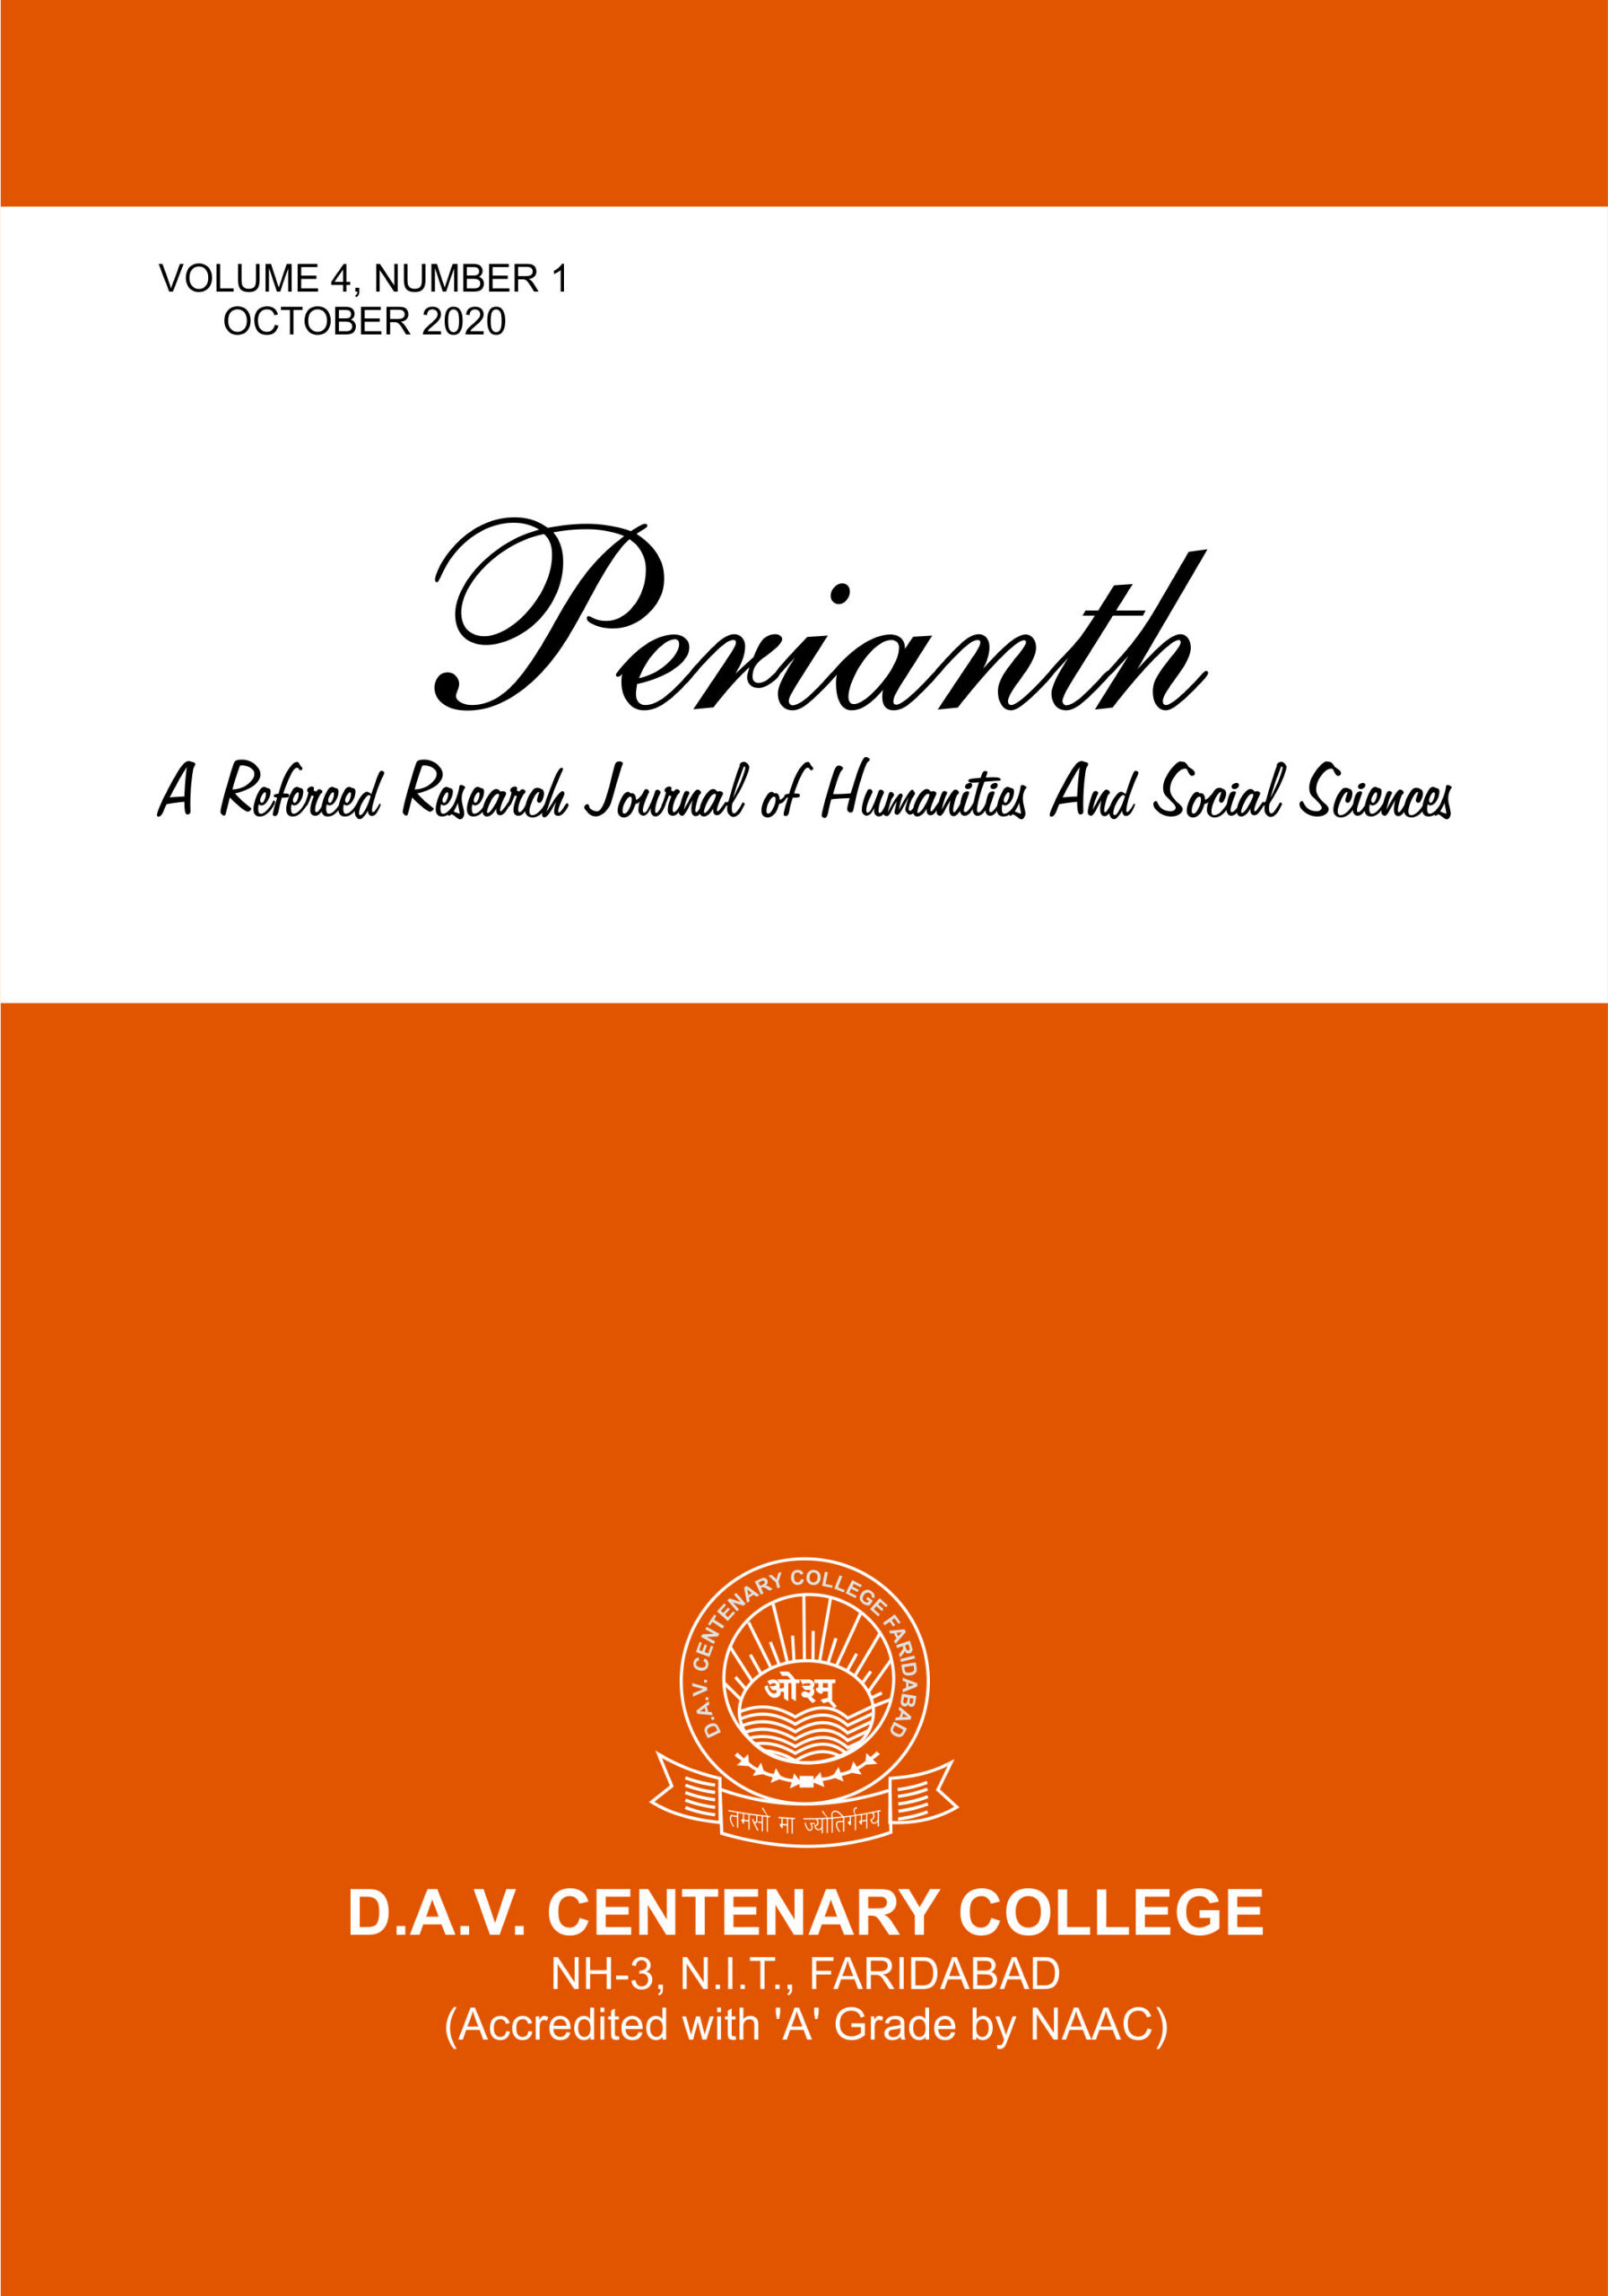 About Perianth(Volume 4,Issue 1)